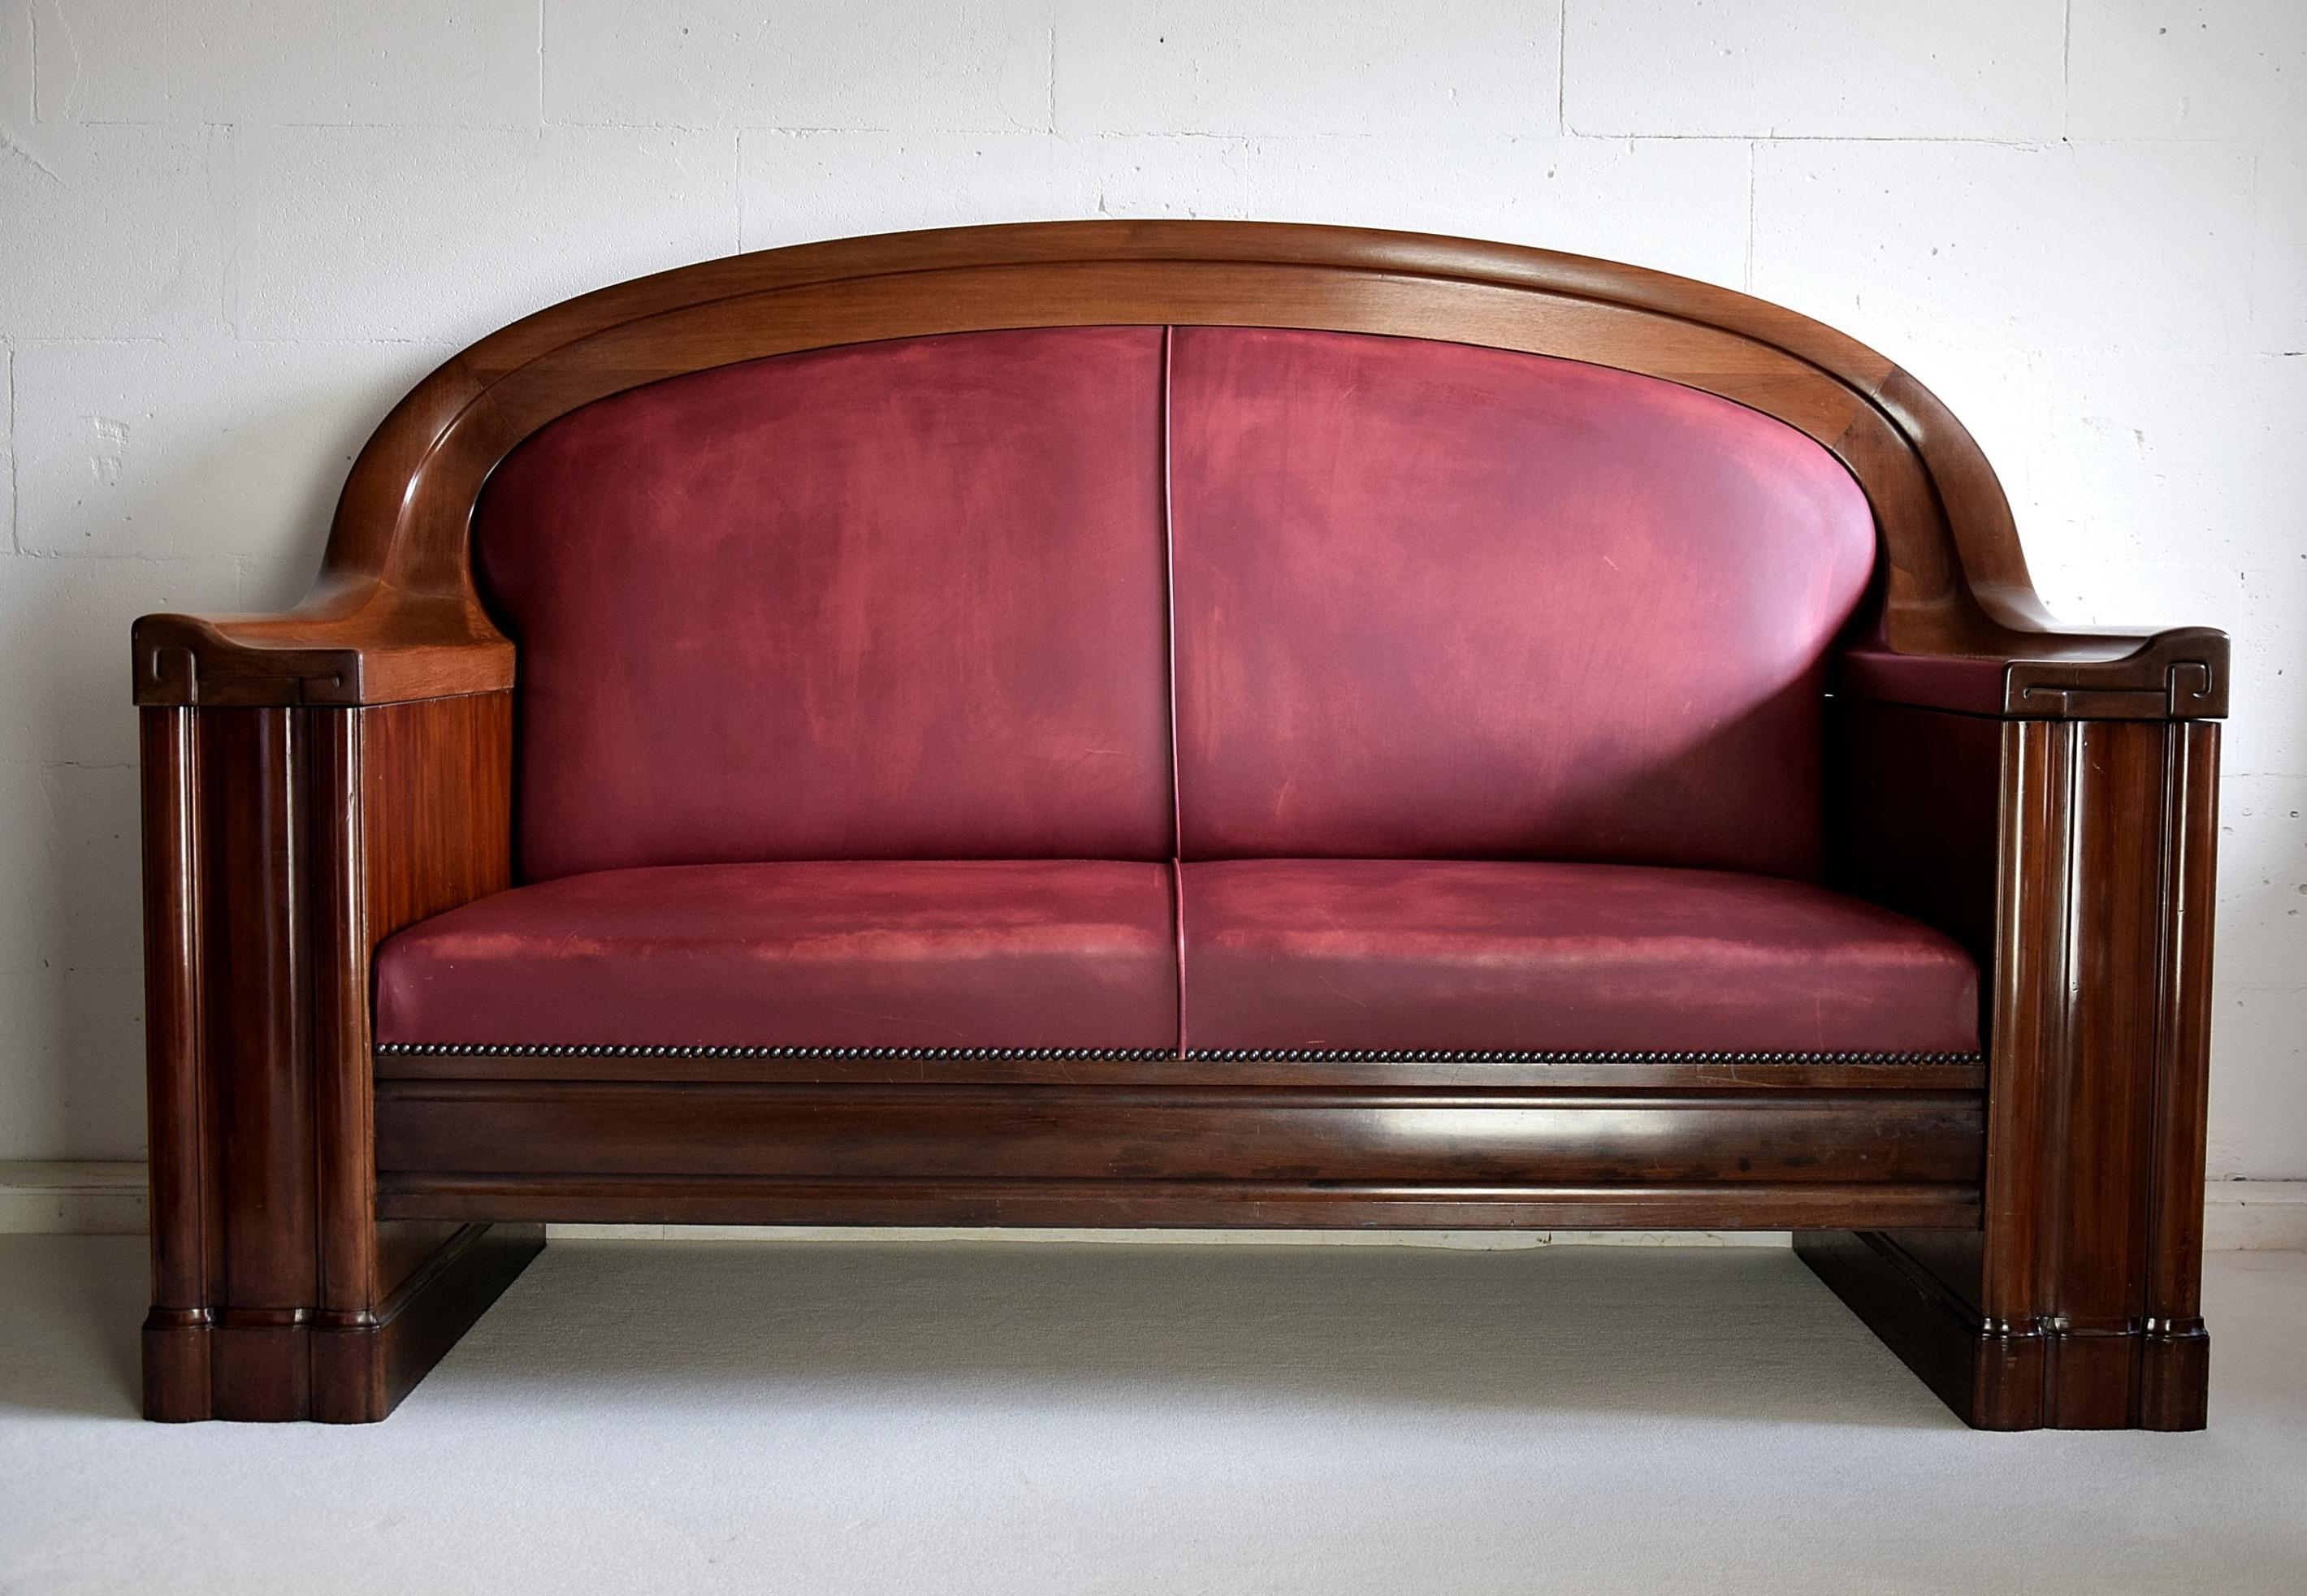 Sophisticated 1930 Danish Art Deco sofa produced by C.B. Hansens furniture makers appointed by the Danish Royal Court. This beauty has leather upholstery and a frame made of mahogany, stained Mahogany and darkened Italian Walnut. The sofa is in